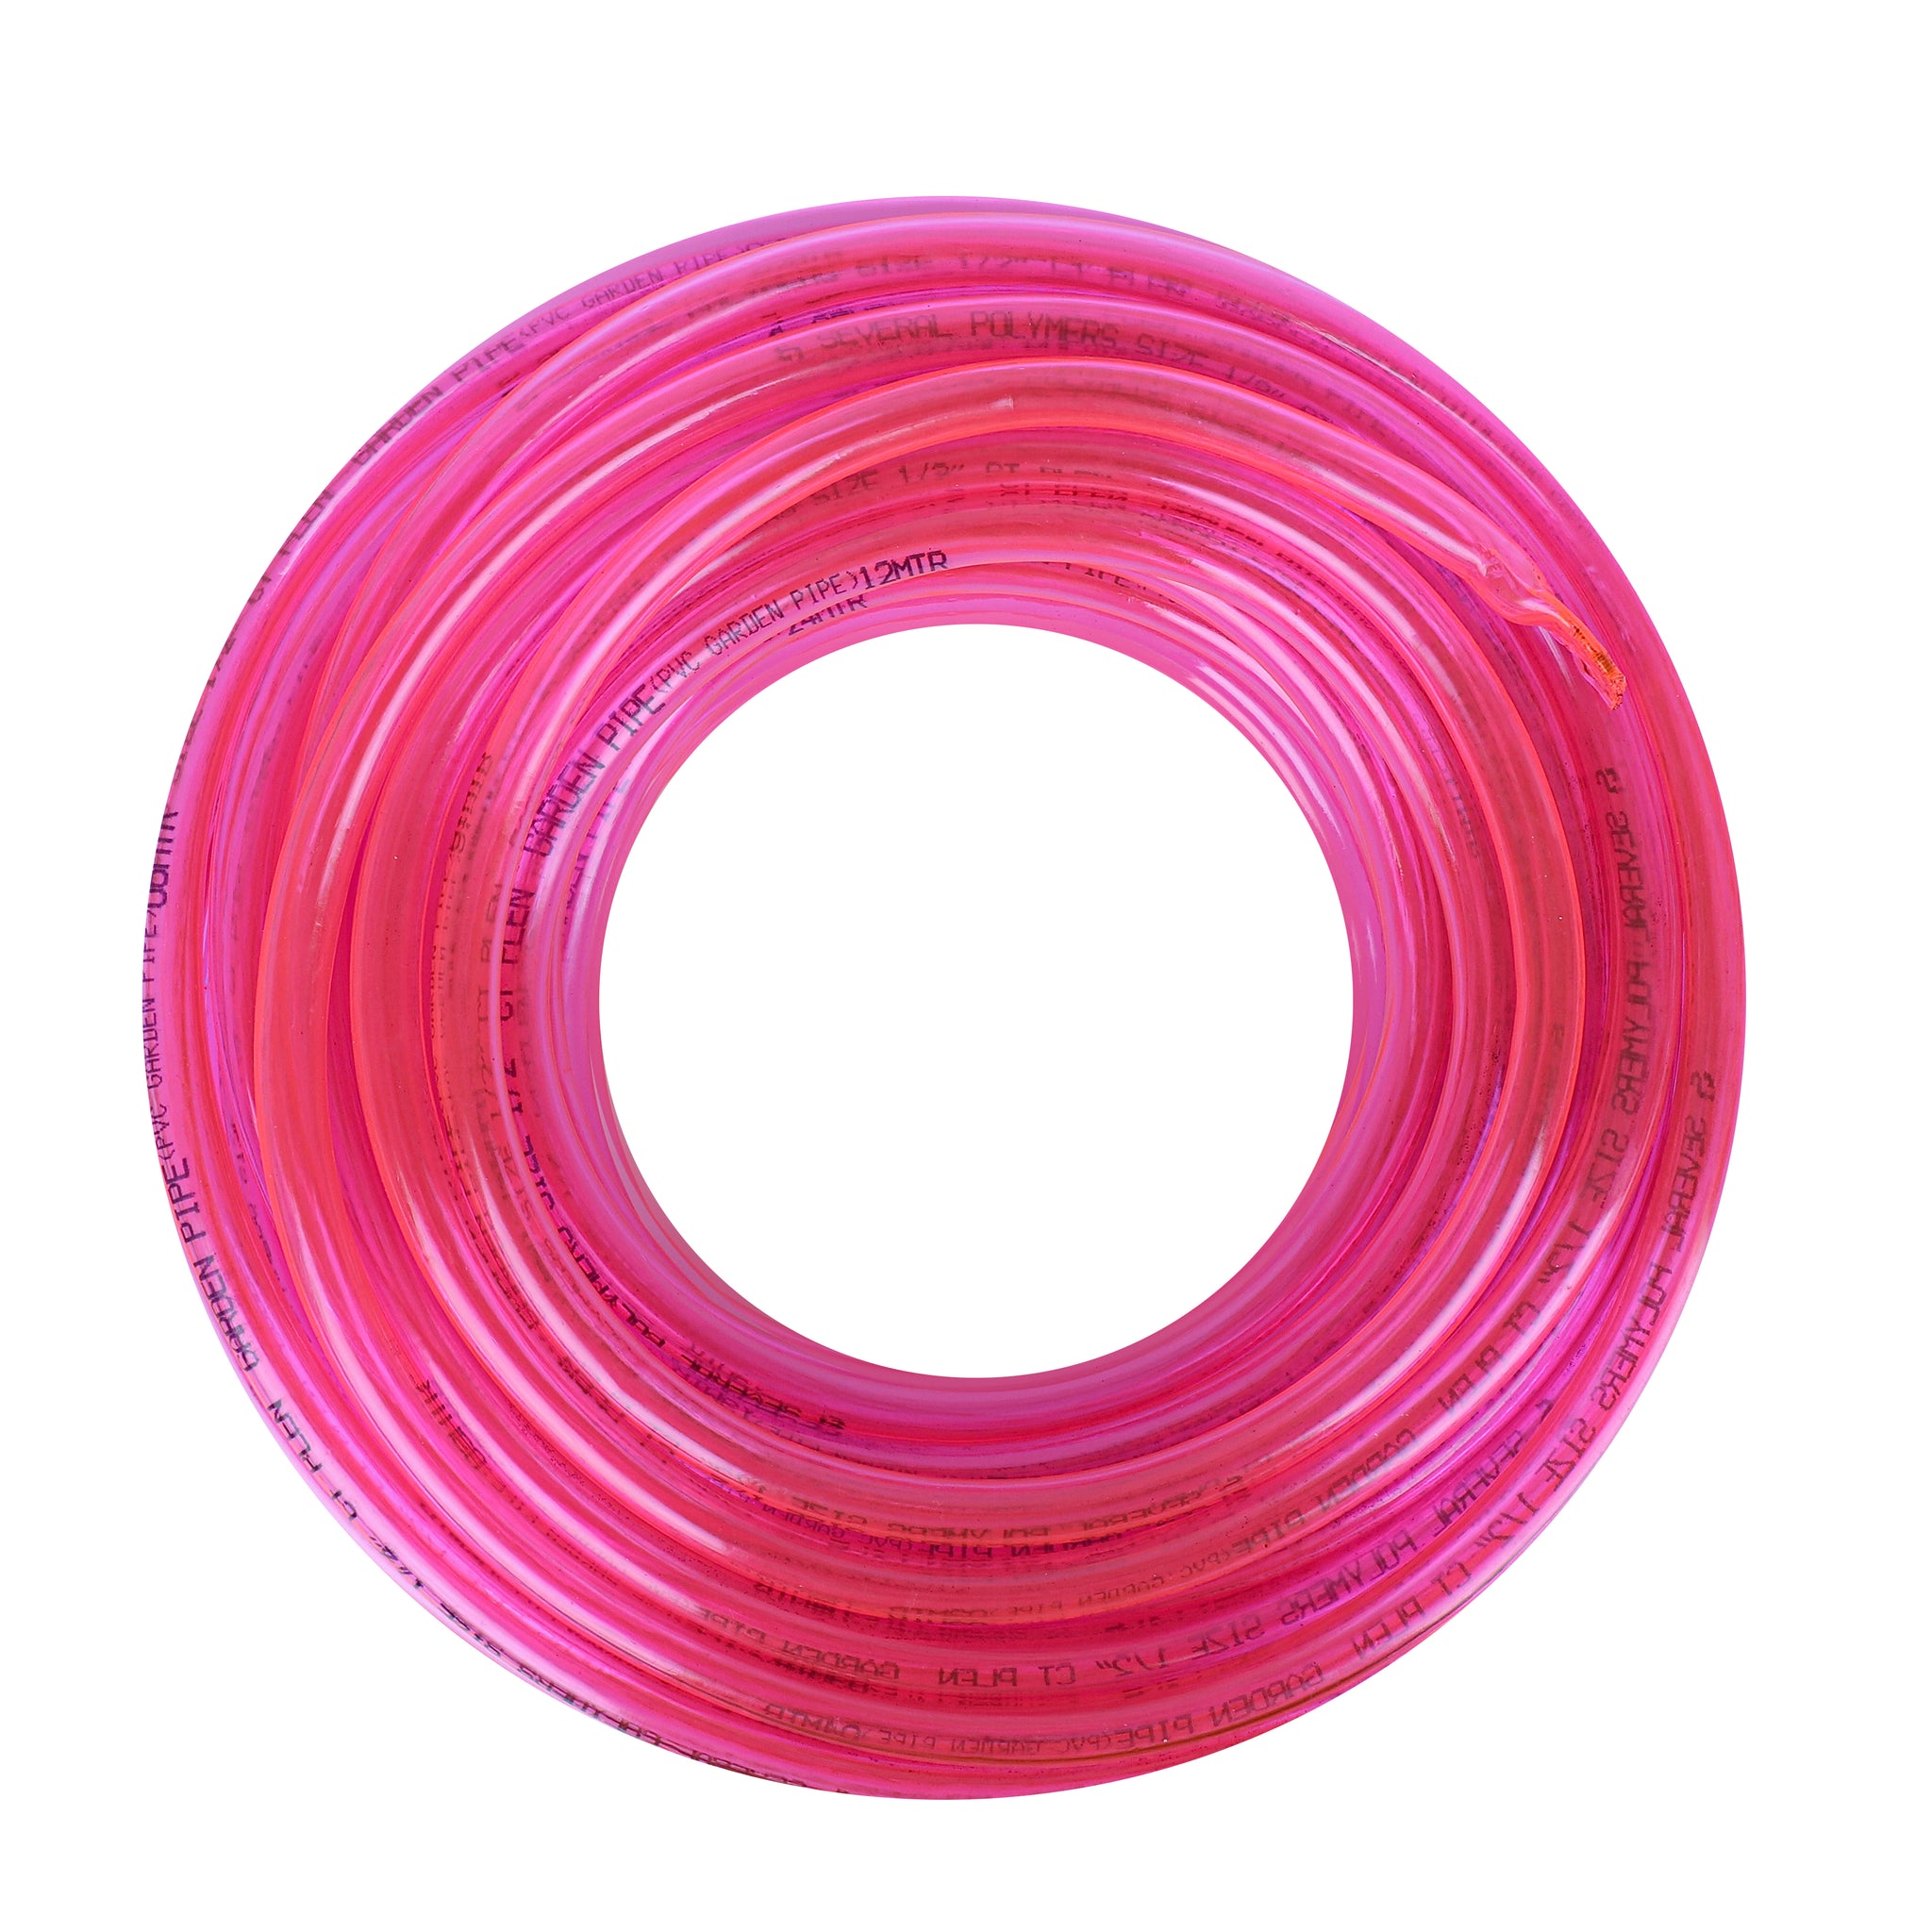 Utkarsh PVC Colour Transparent Garden Water Hose Pipe (Size: 1/2")  for Garden, Car Wash, Floor Clean, Pet Bath, Easy to Connect Indoor/Outdoor Use (Multicolour)